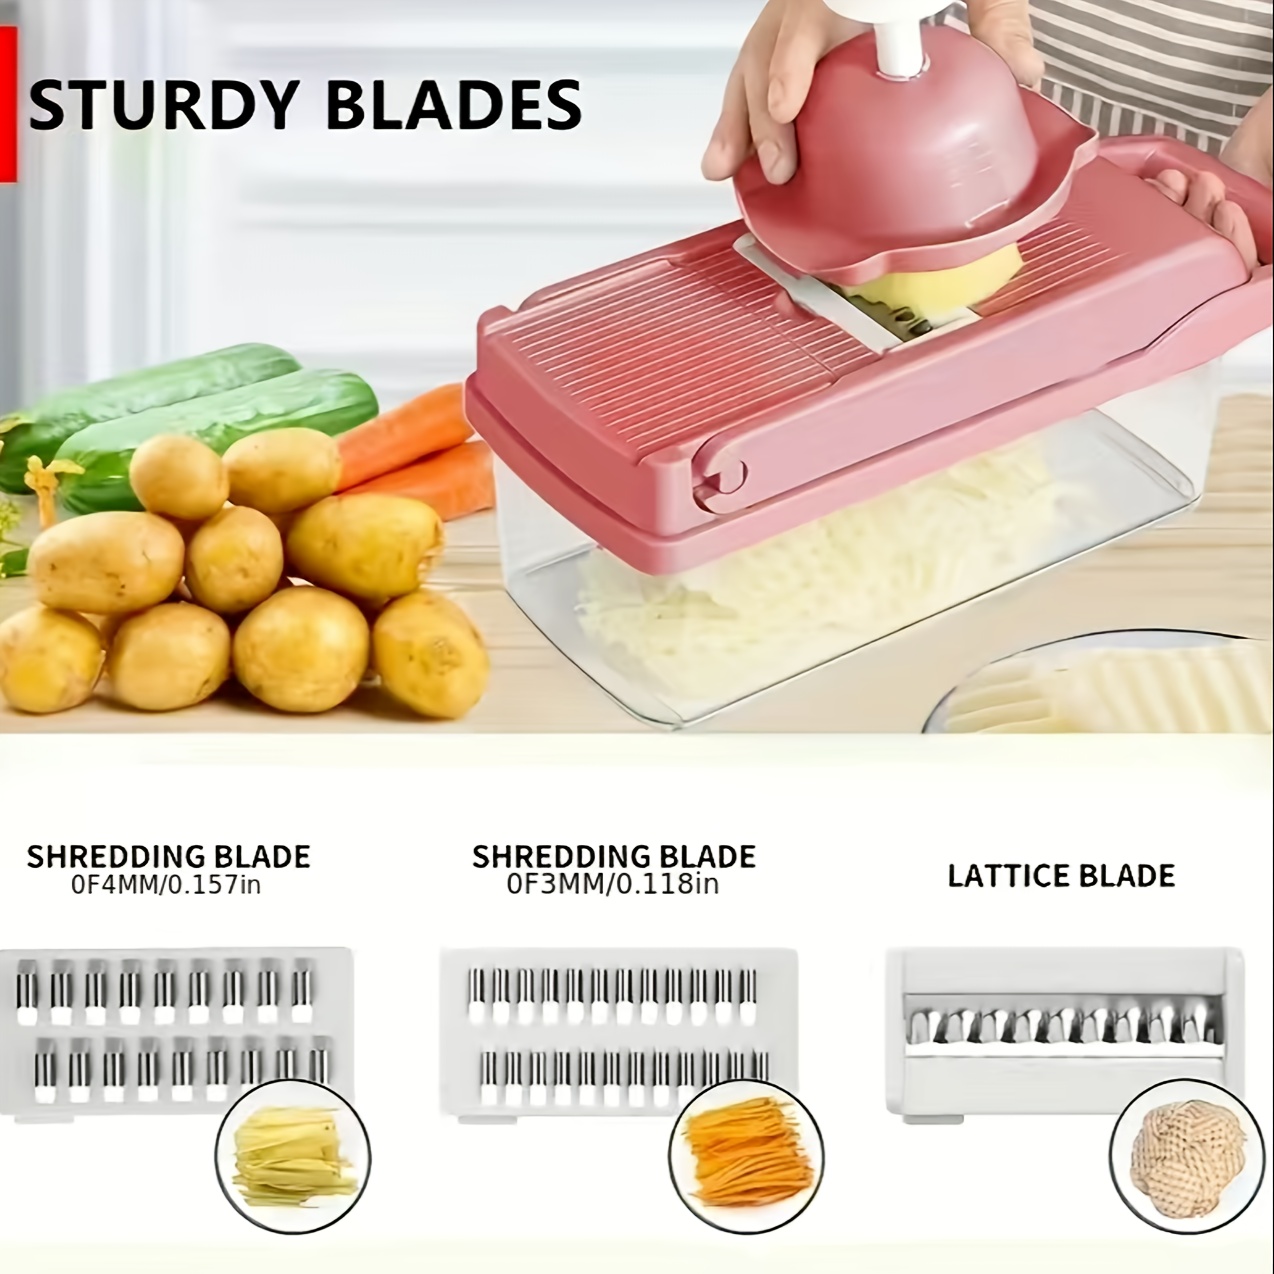 Sturdy And Multifunction vegetable slicer machine 